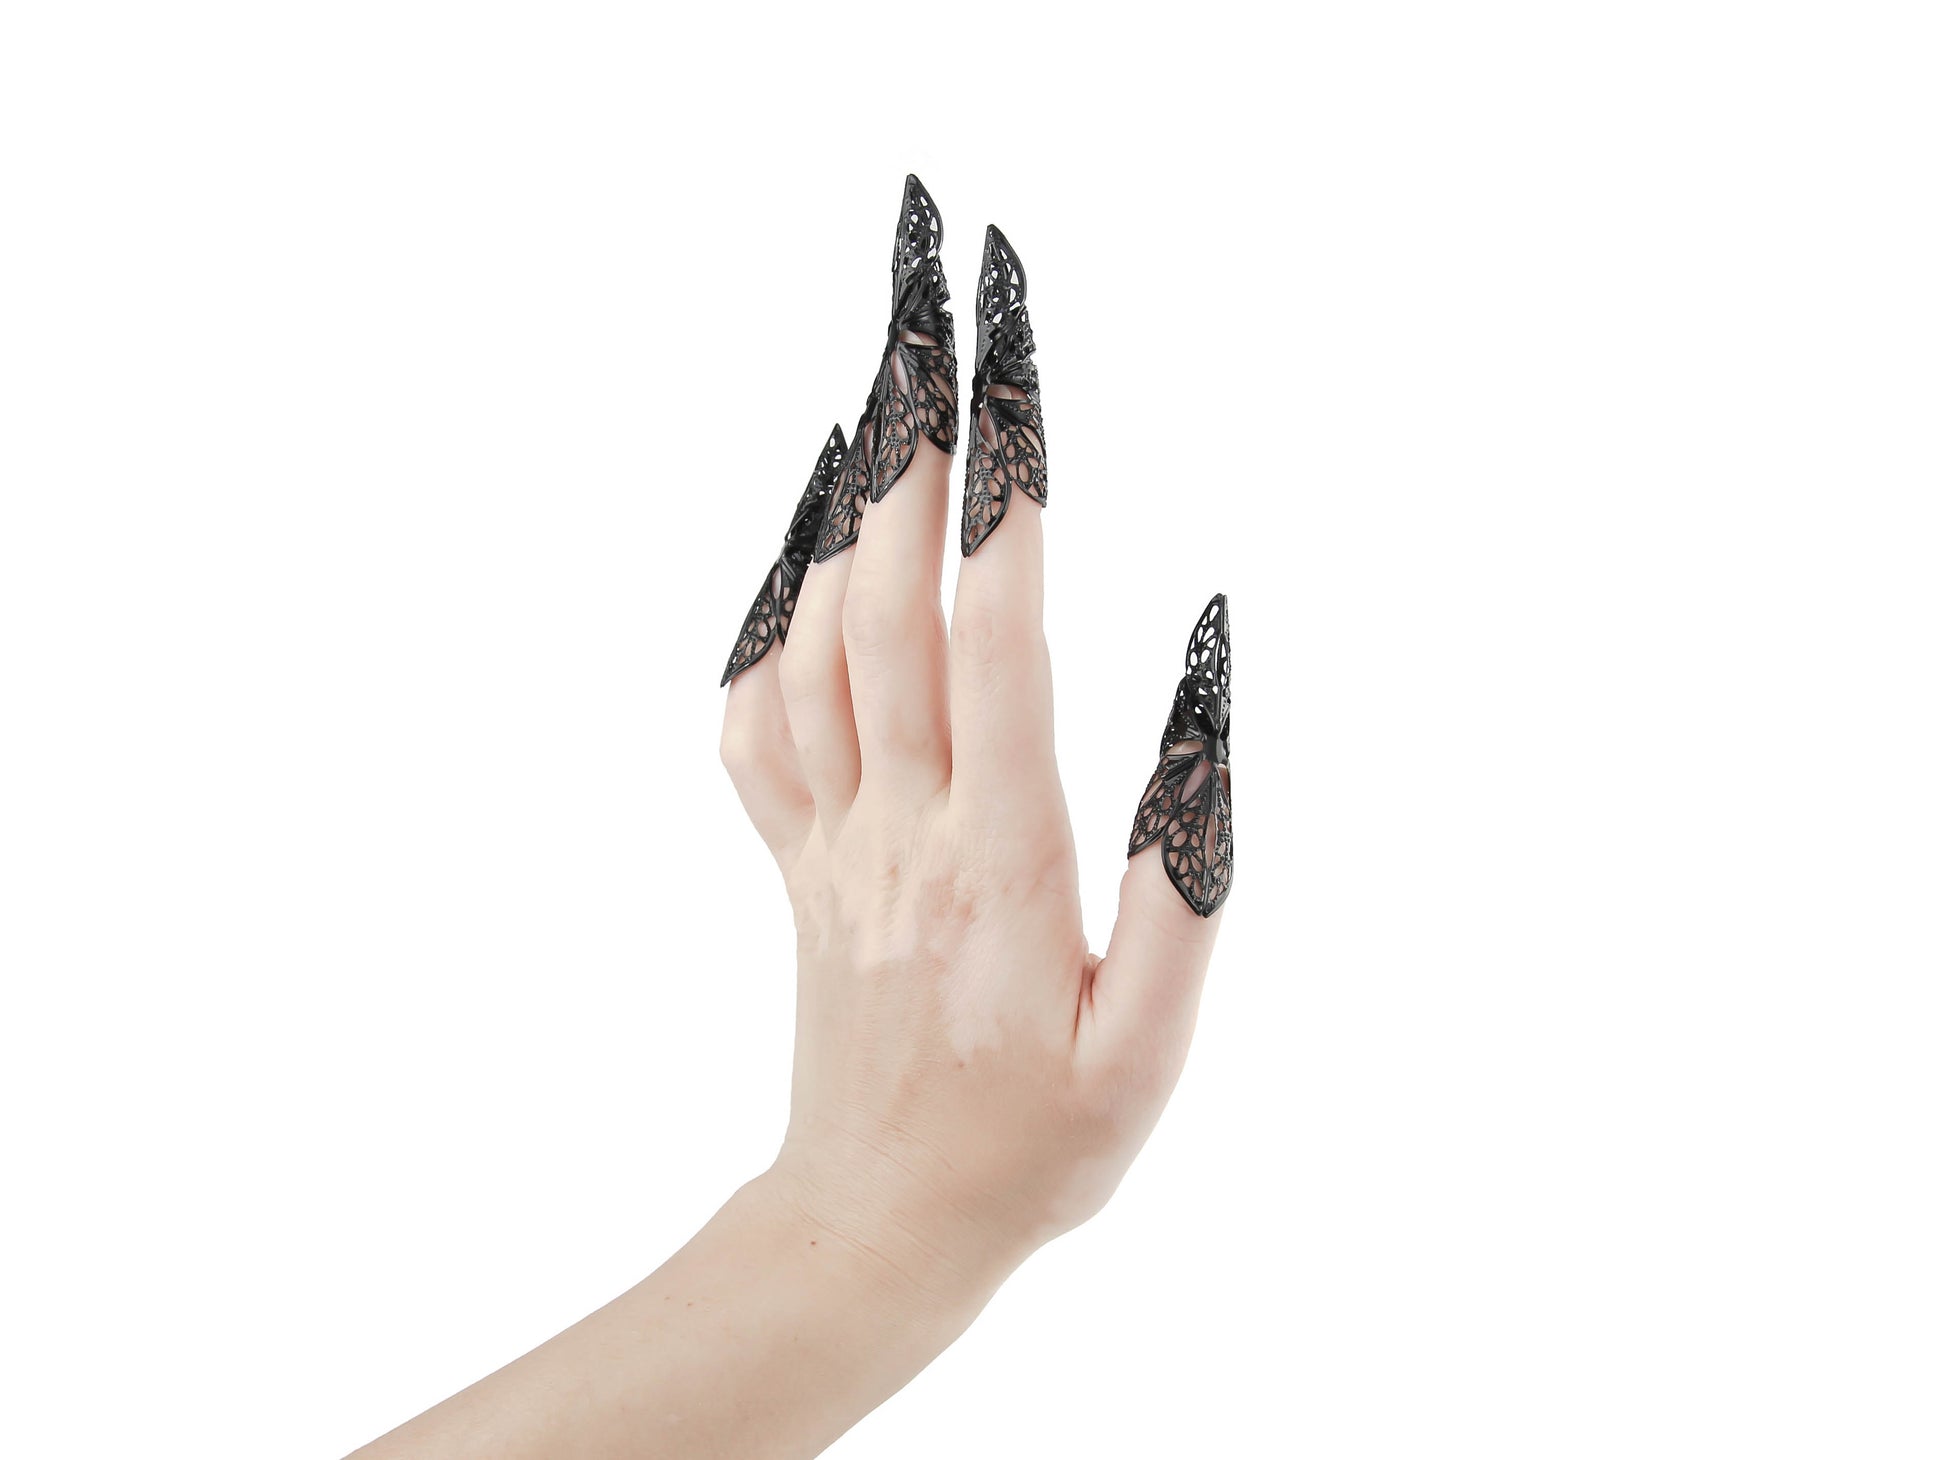 A hand is adorned with Myril Jewels' long black nail claws, a statement accessory for the neo-gothic aficionado. This striking piece fits perfectly within a Halloween or punk jewelry collection, also suitable for everyday wear by those with a love for gothic-chic or whimsigoth styles. The claws represent a bold choice for rave parties or festivals, and make an unforgettable goth girlfriend gift.